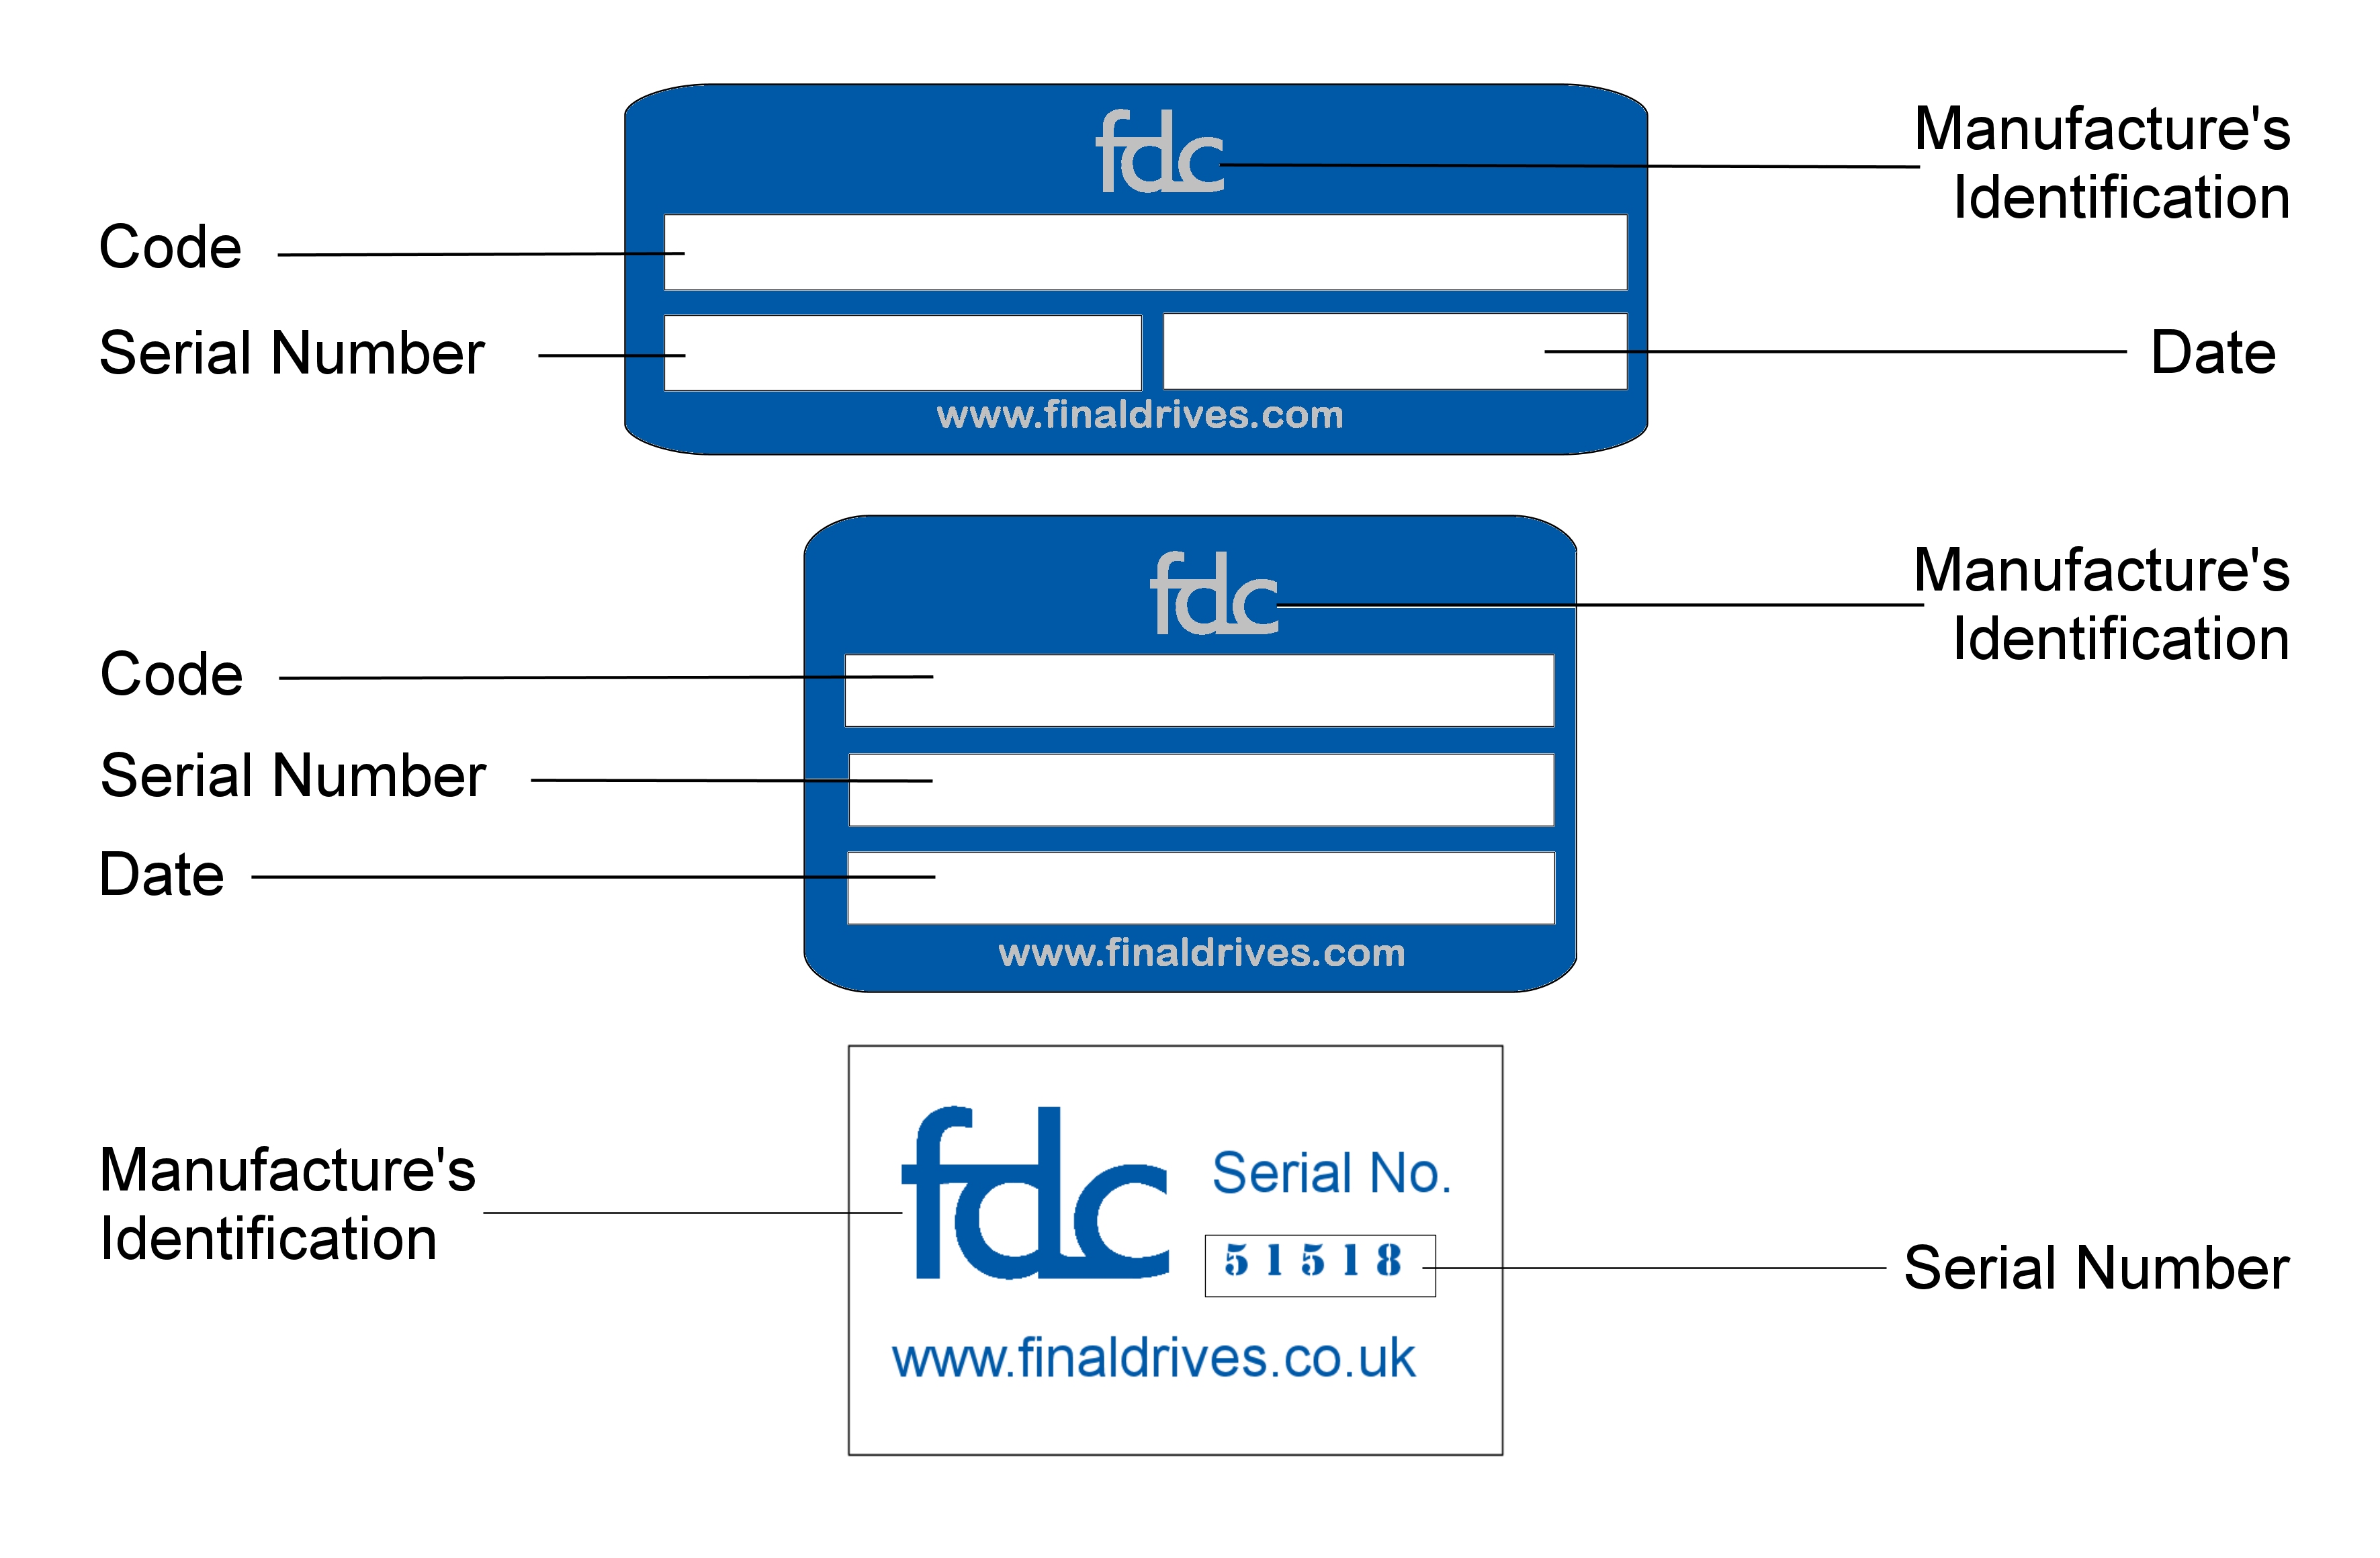 FDC Travel Drives